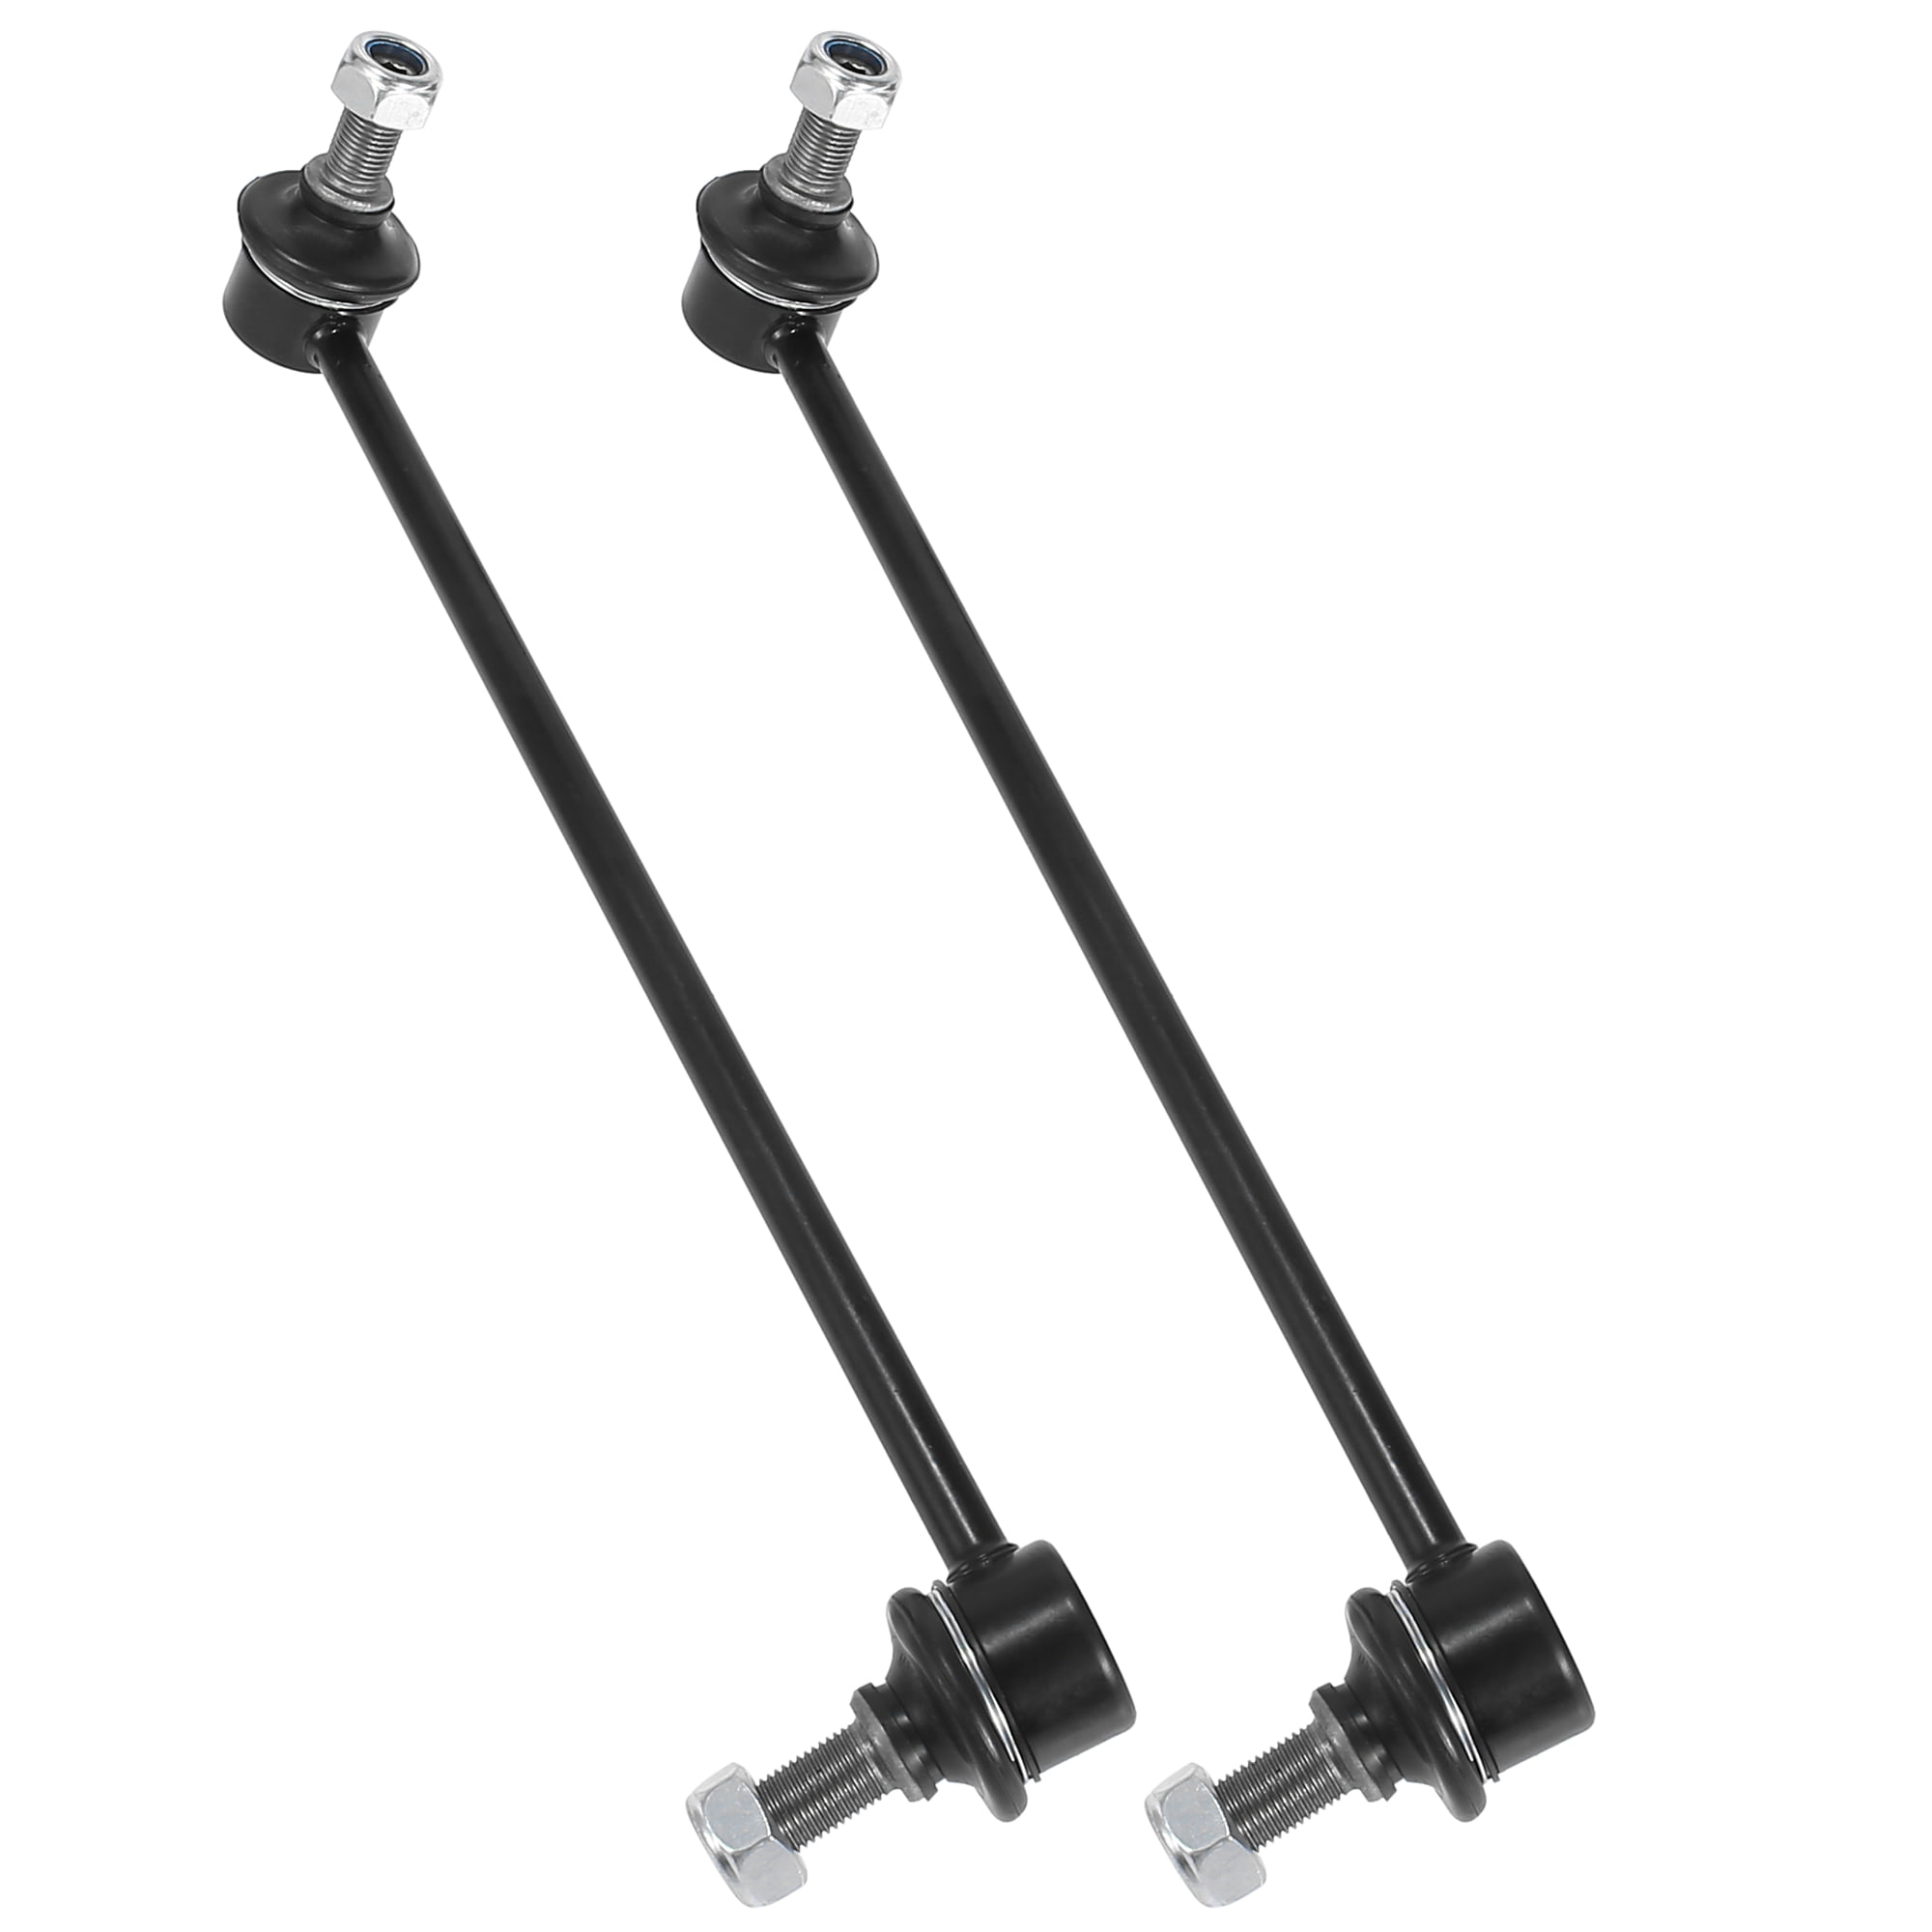 Suspension Dudes 4PC Front & Rear Stabilizer Sway Bar Link Set for Nissan Altima Maxima Murano 